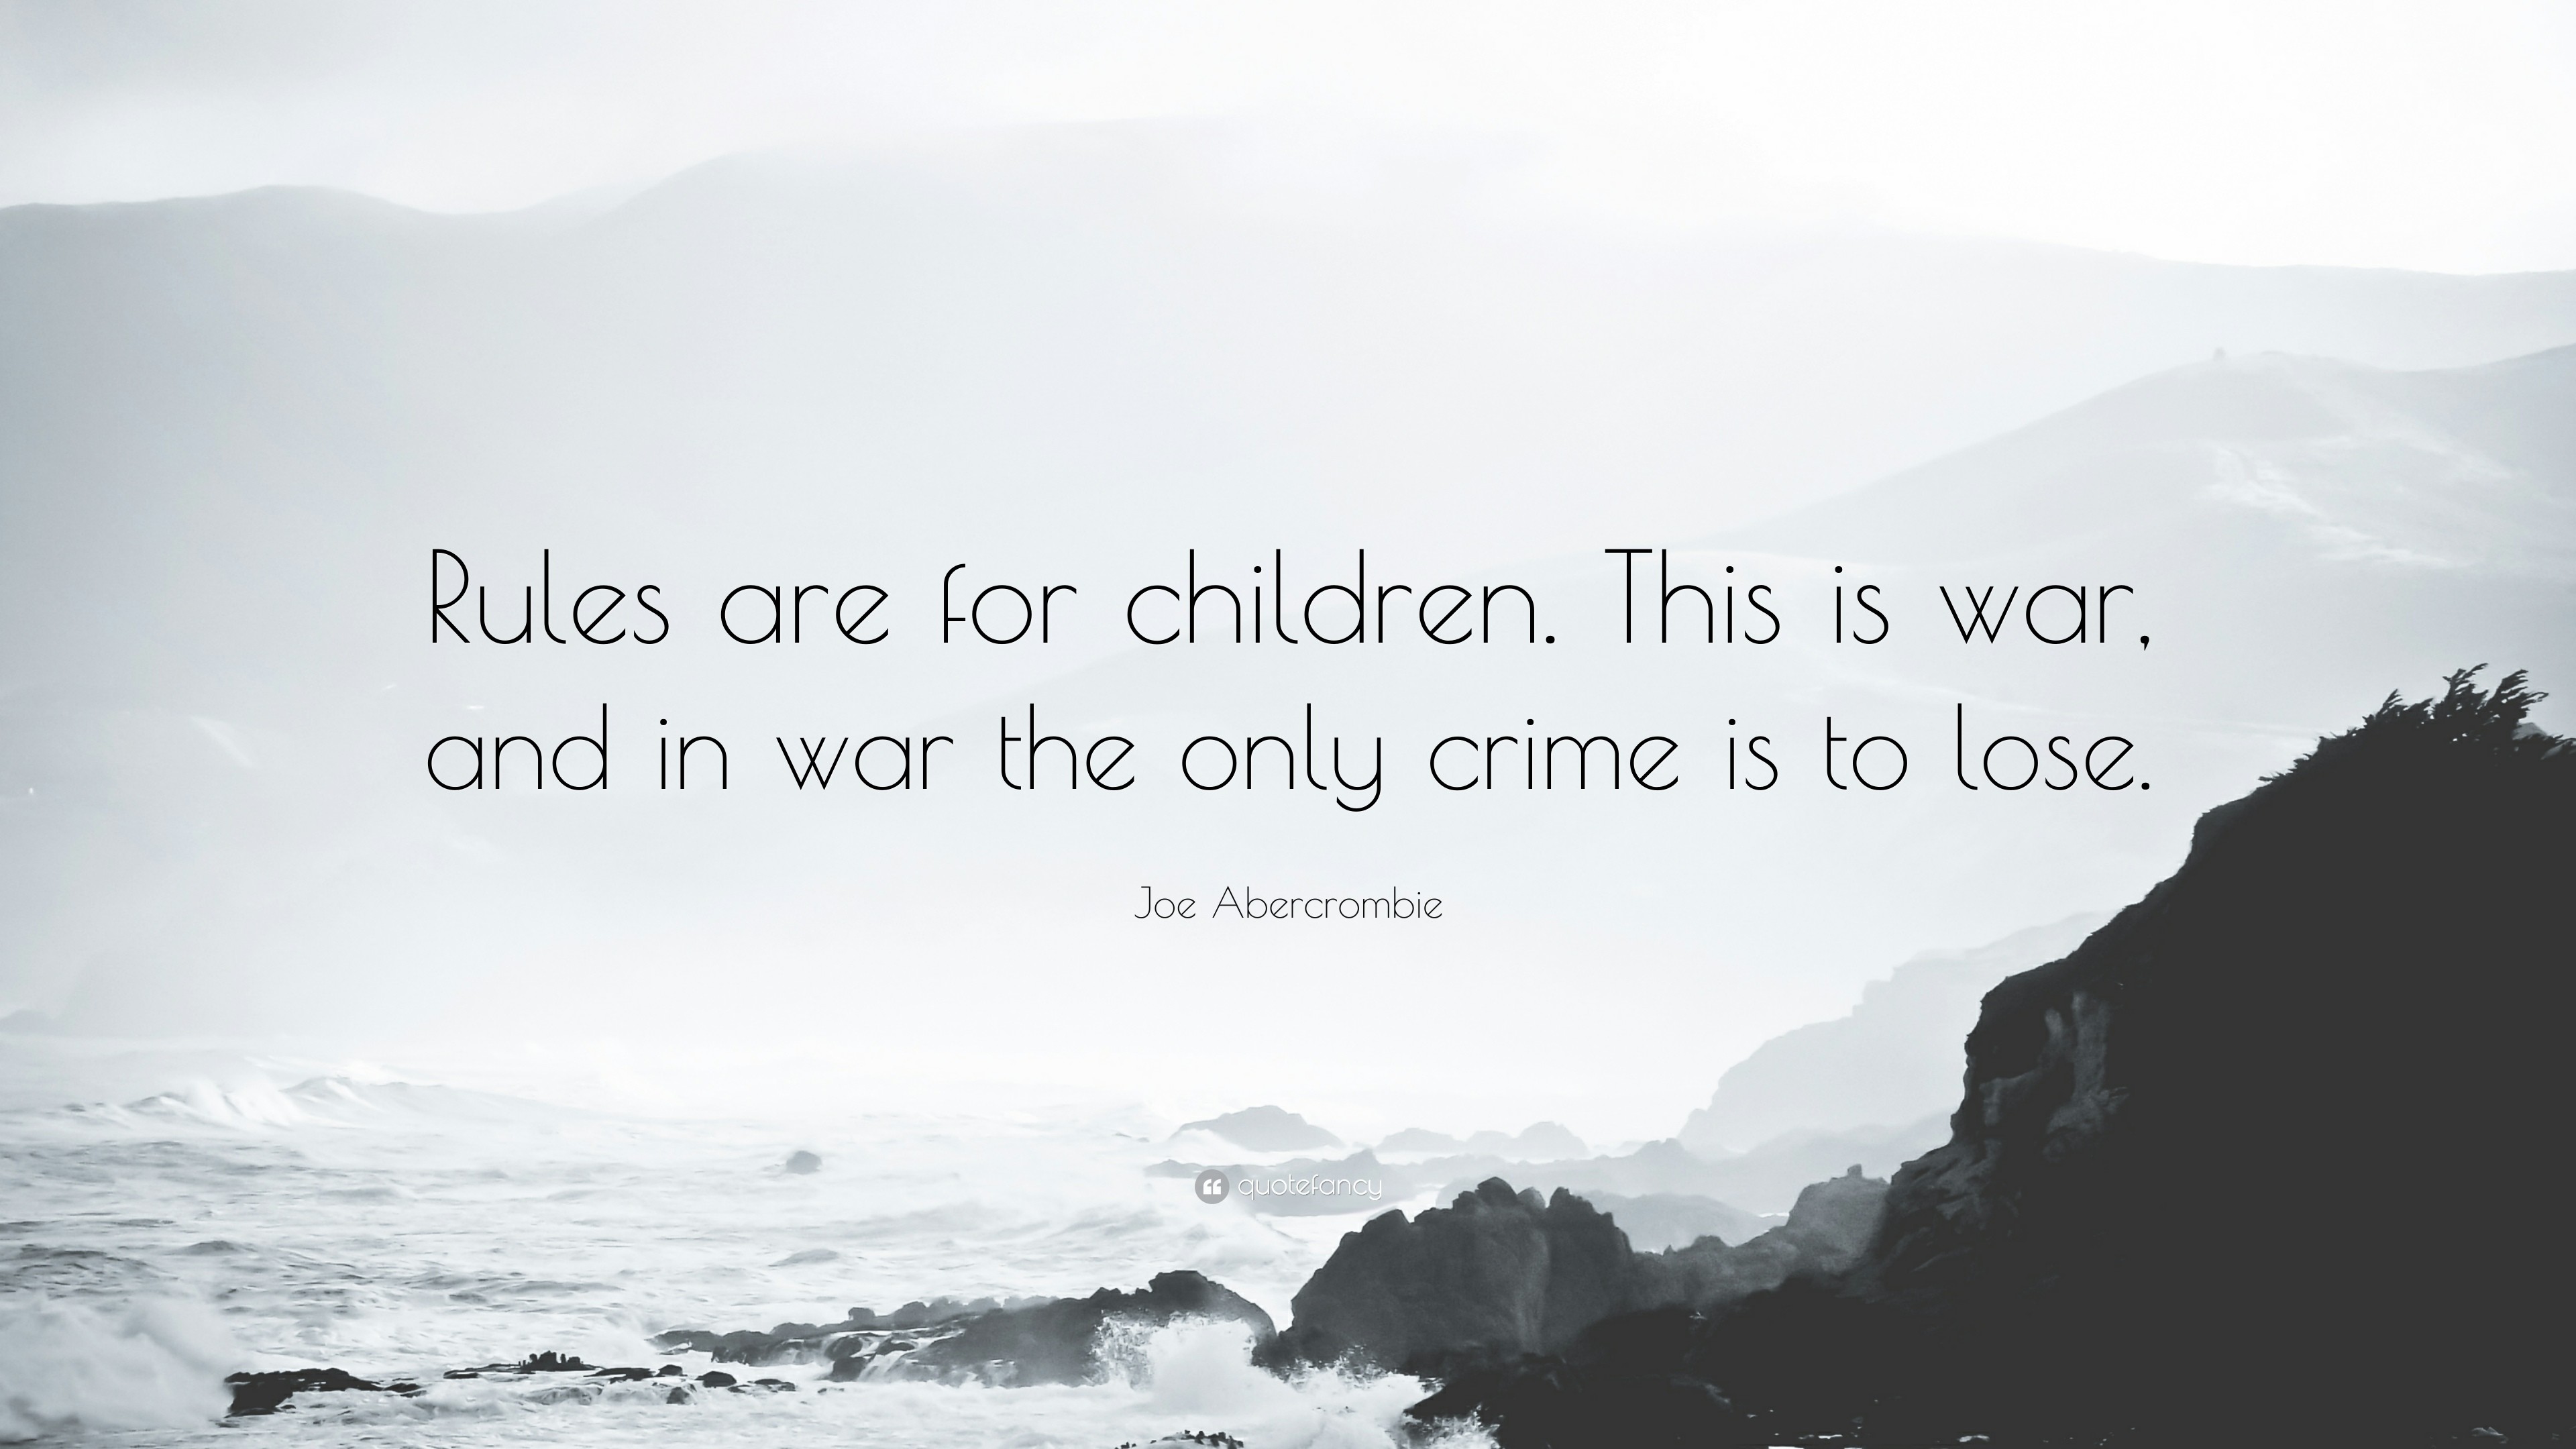 3840x2160 Joe Abercrombie Quote: “Rules are for children. This is war, and in